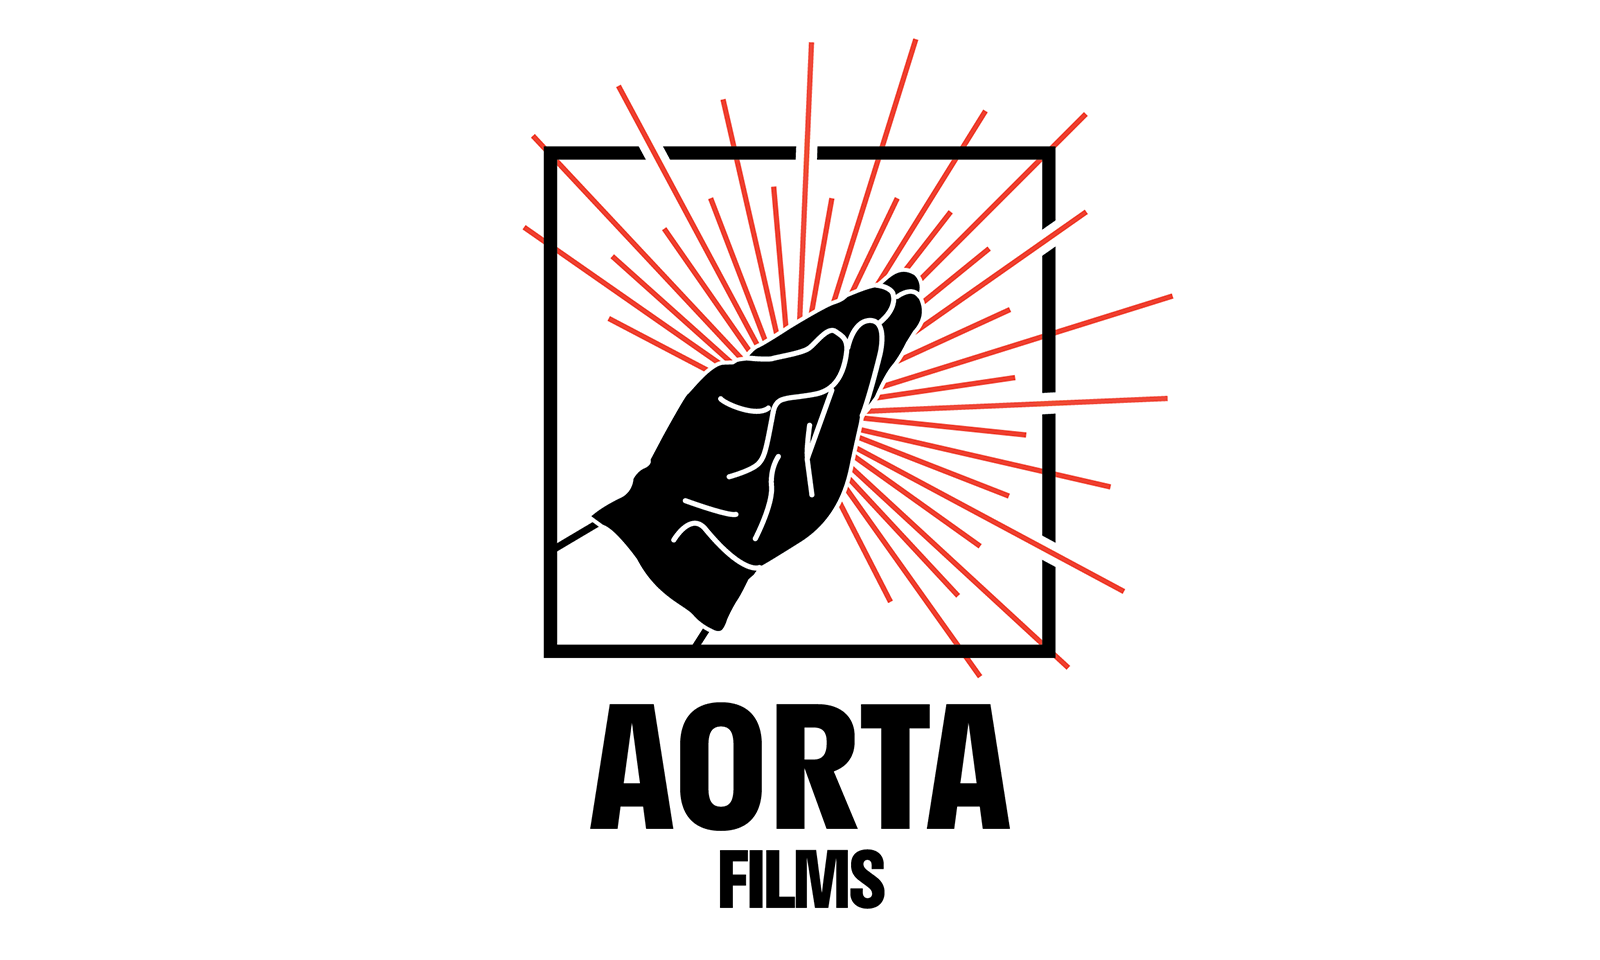 AORTA Films, Gay/Queer Indie Porn Studio, To Relaunch Tomorrow